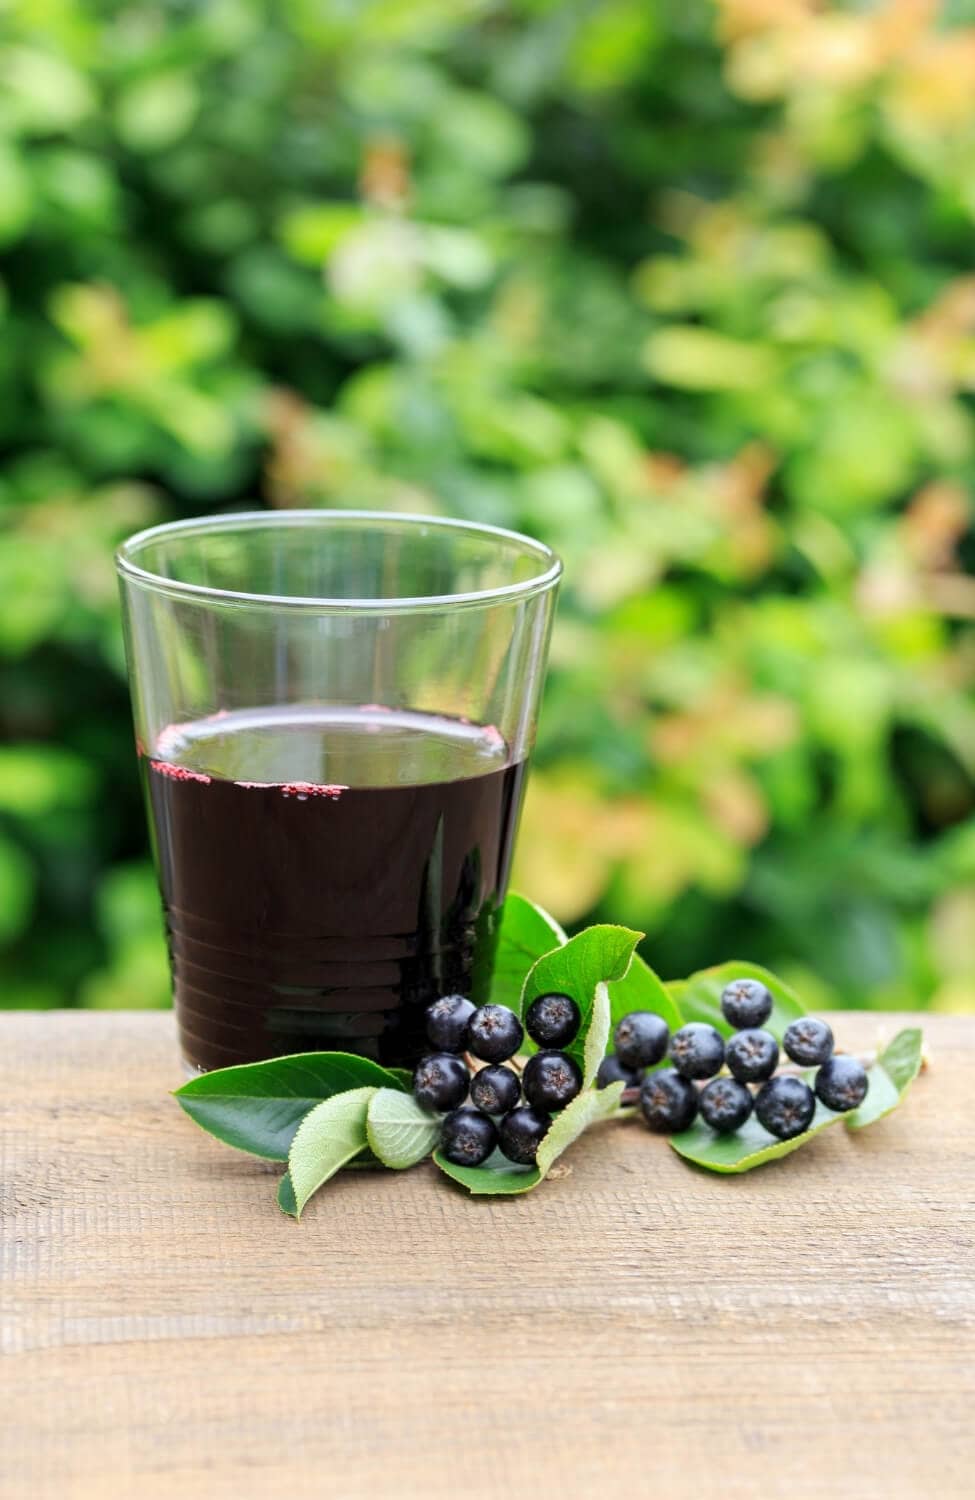 Aronia berries and juice in glass